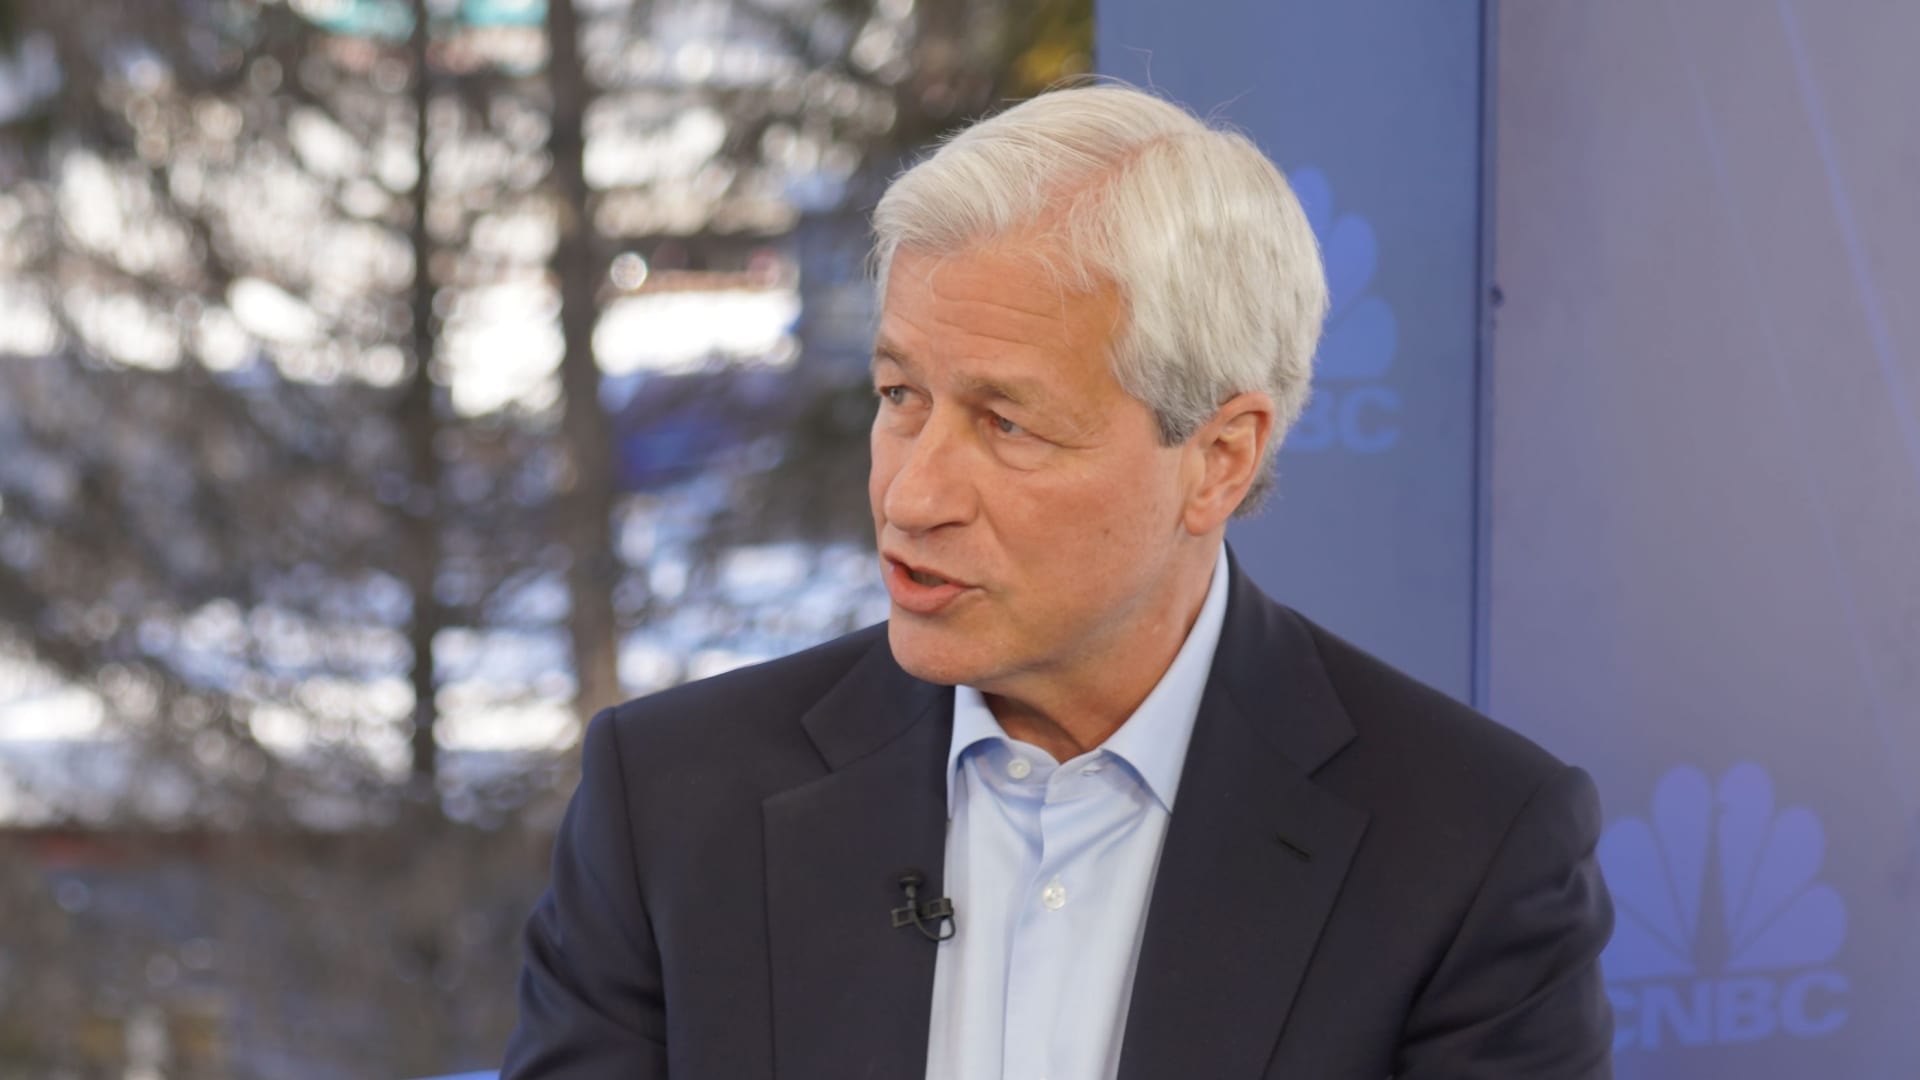 Jamie Dimon says ‘brace yourself’ for an economic hurricane caused by the Fed and Ukraine war